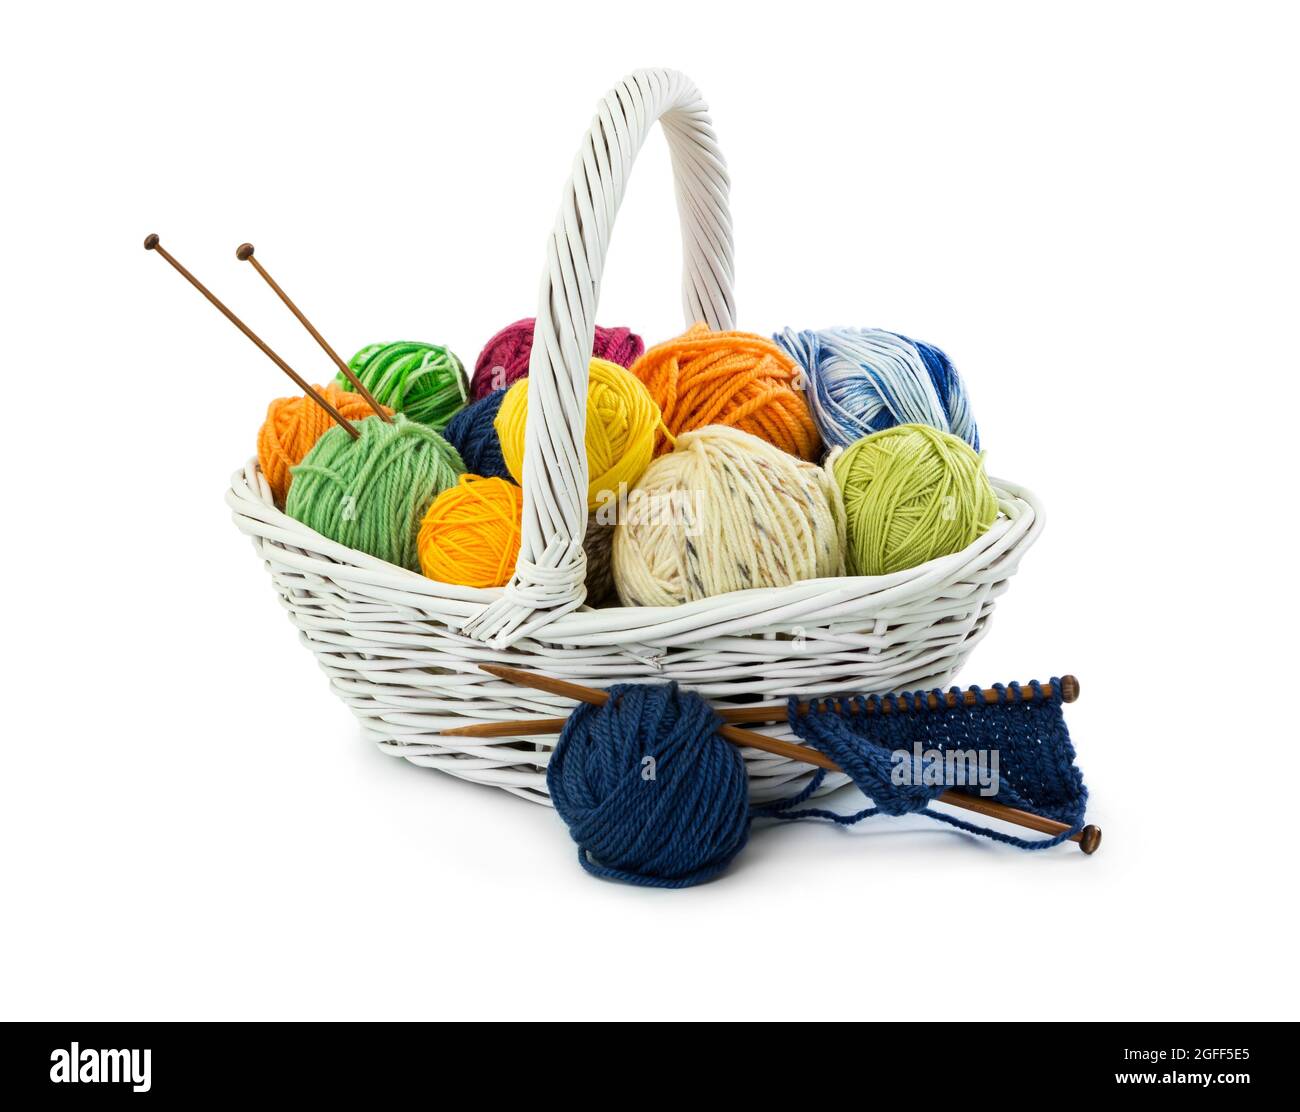 Balls of woolen threads for knitting in wicker basket isolated on white background. Stock Photo